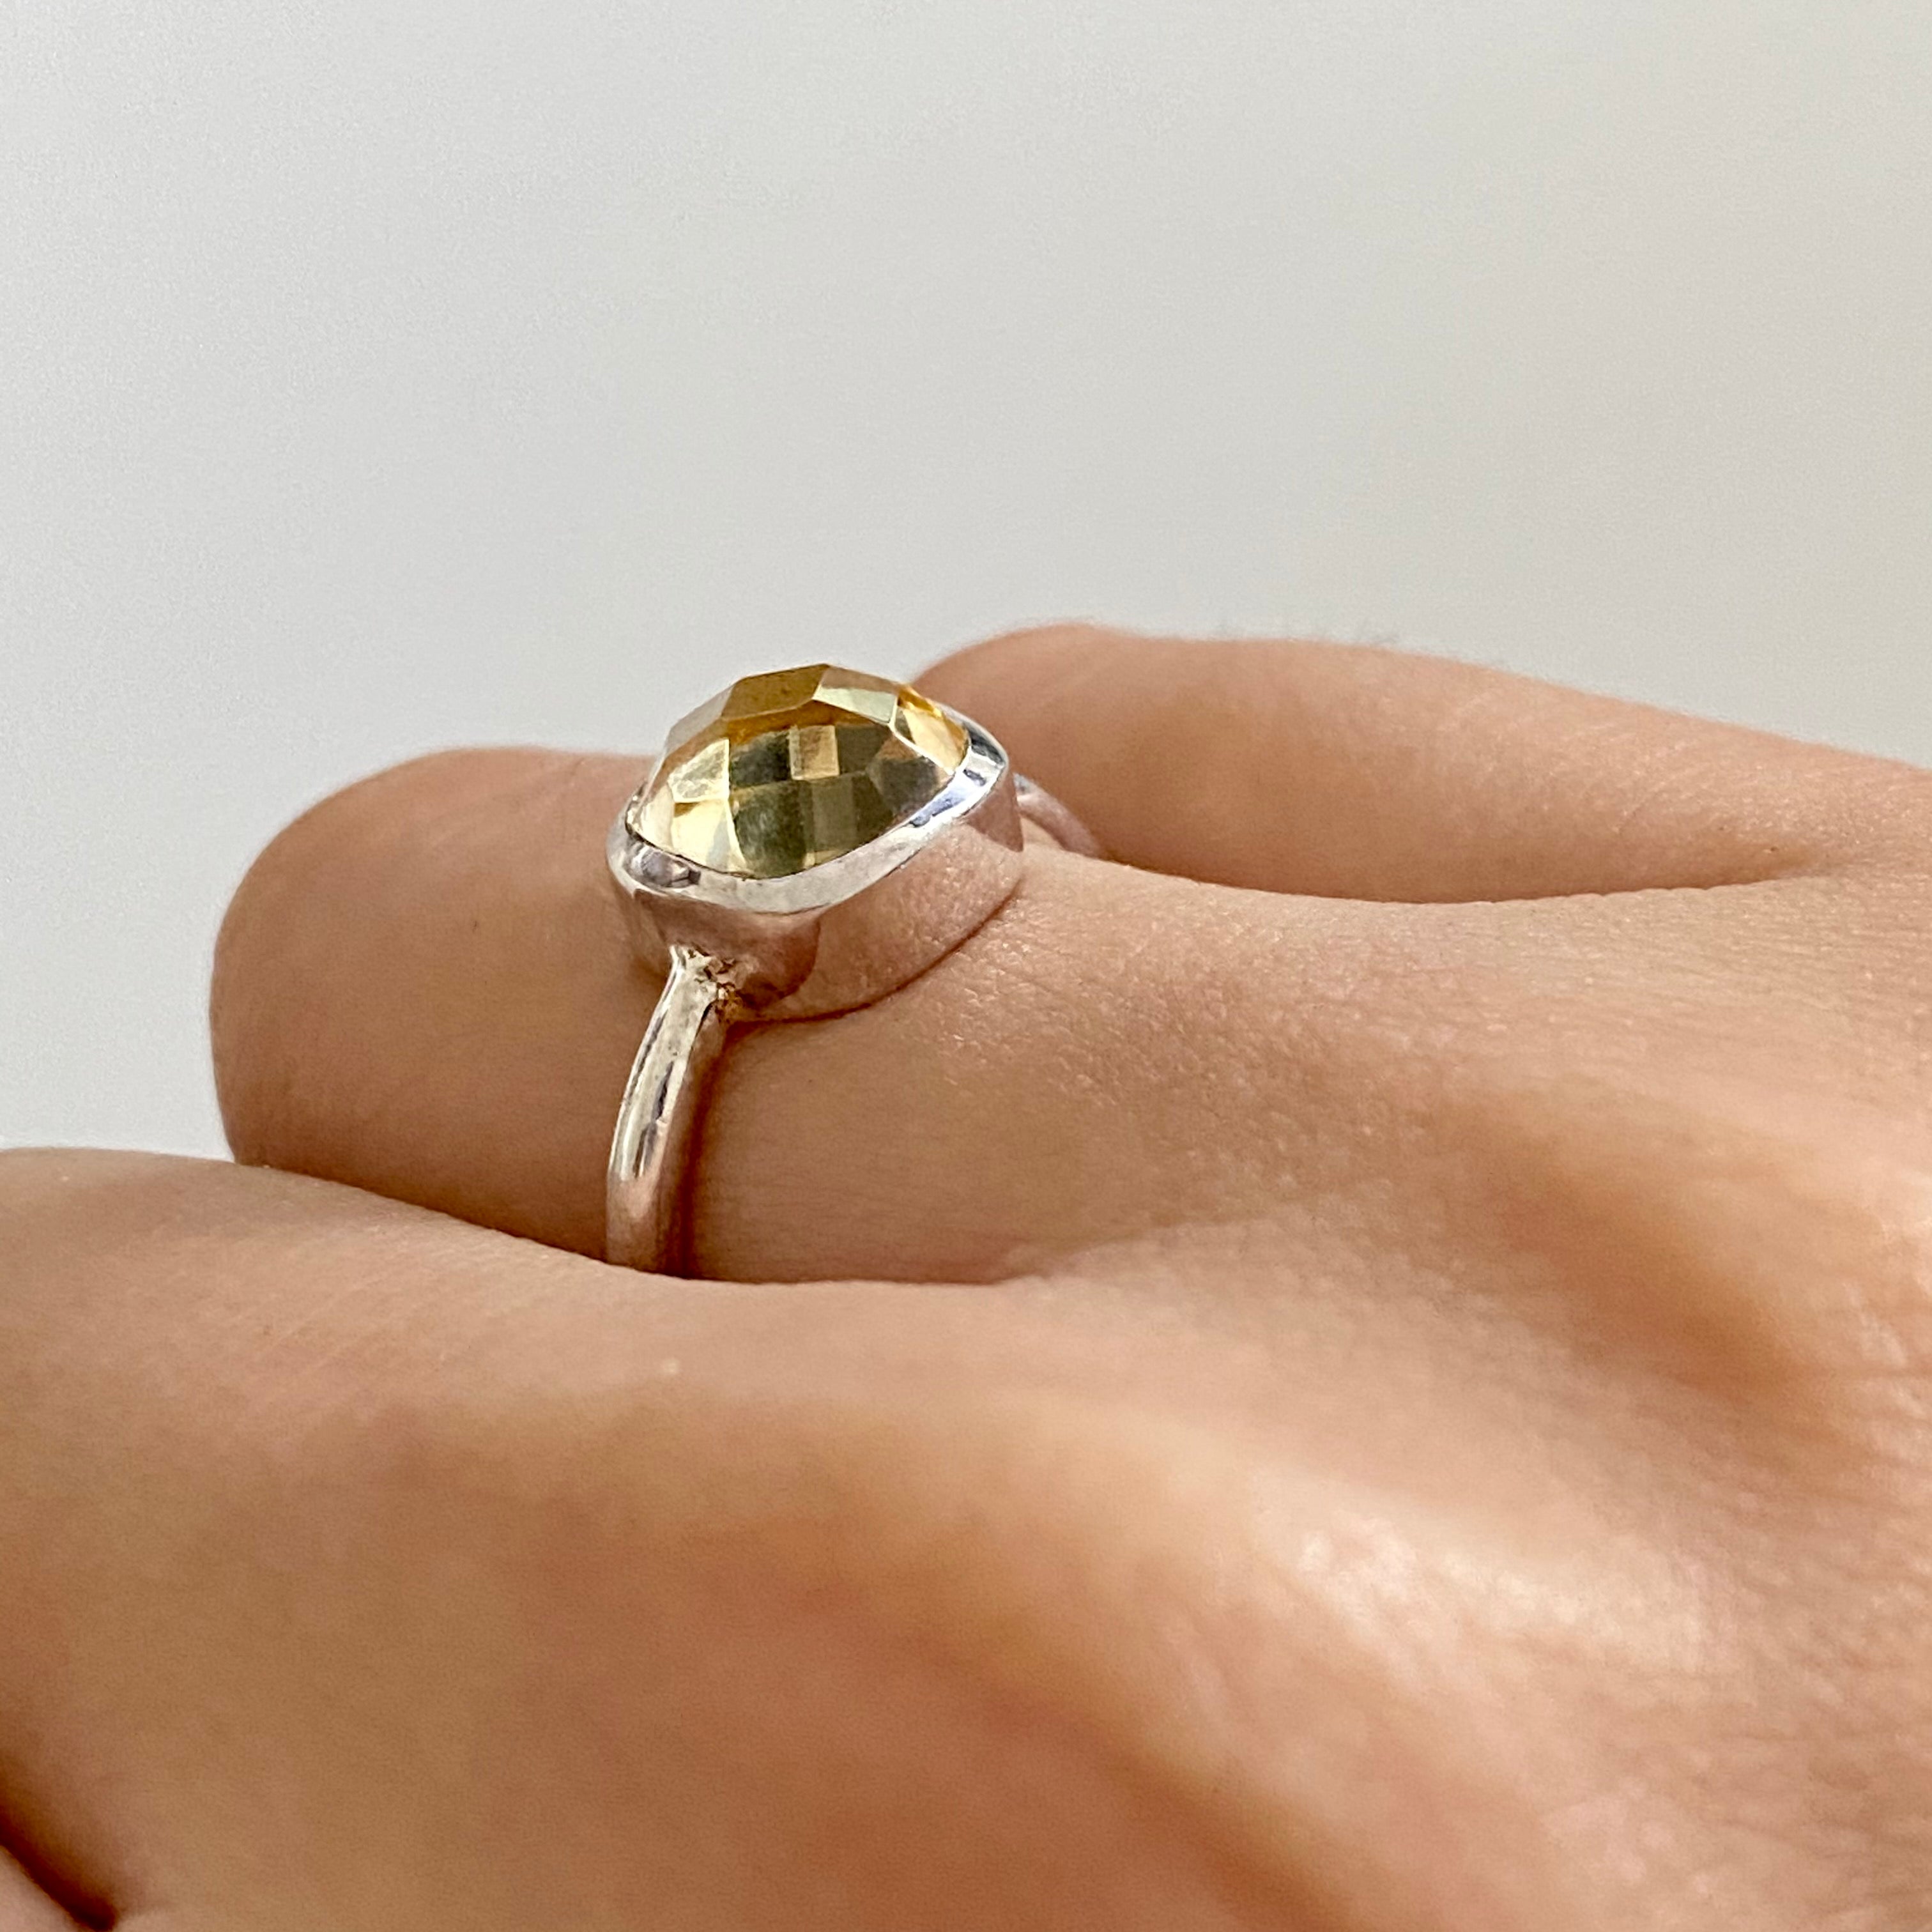 Faceted Square Cut Natural Gemstone Sterling Silver Solitaire Ring - Citrine